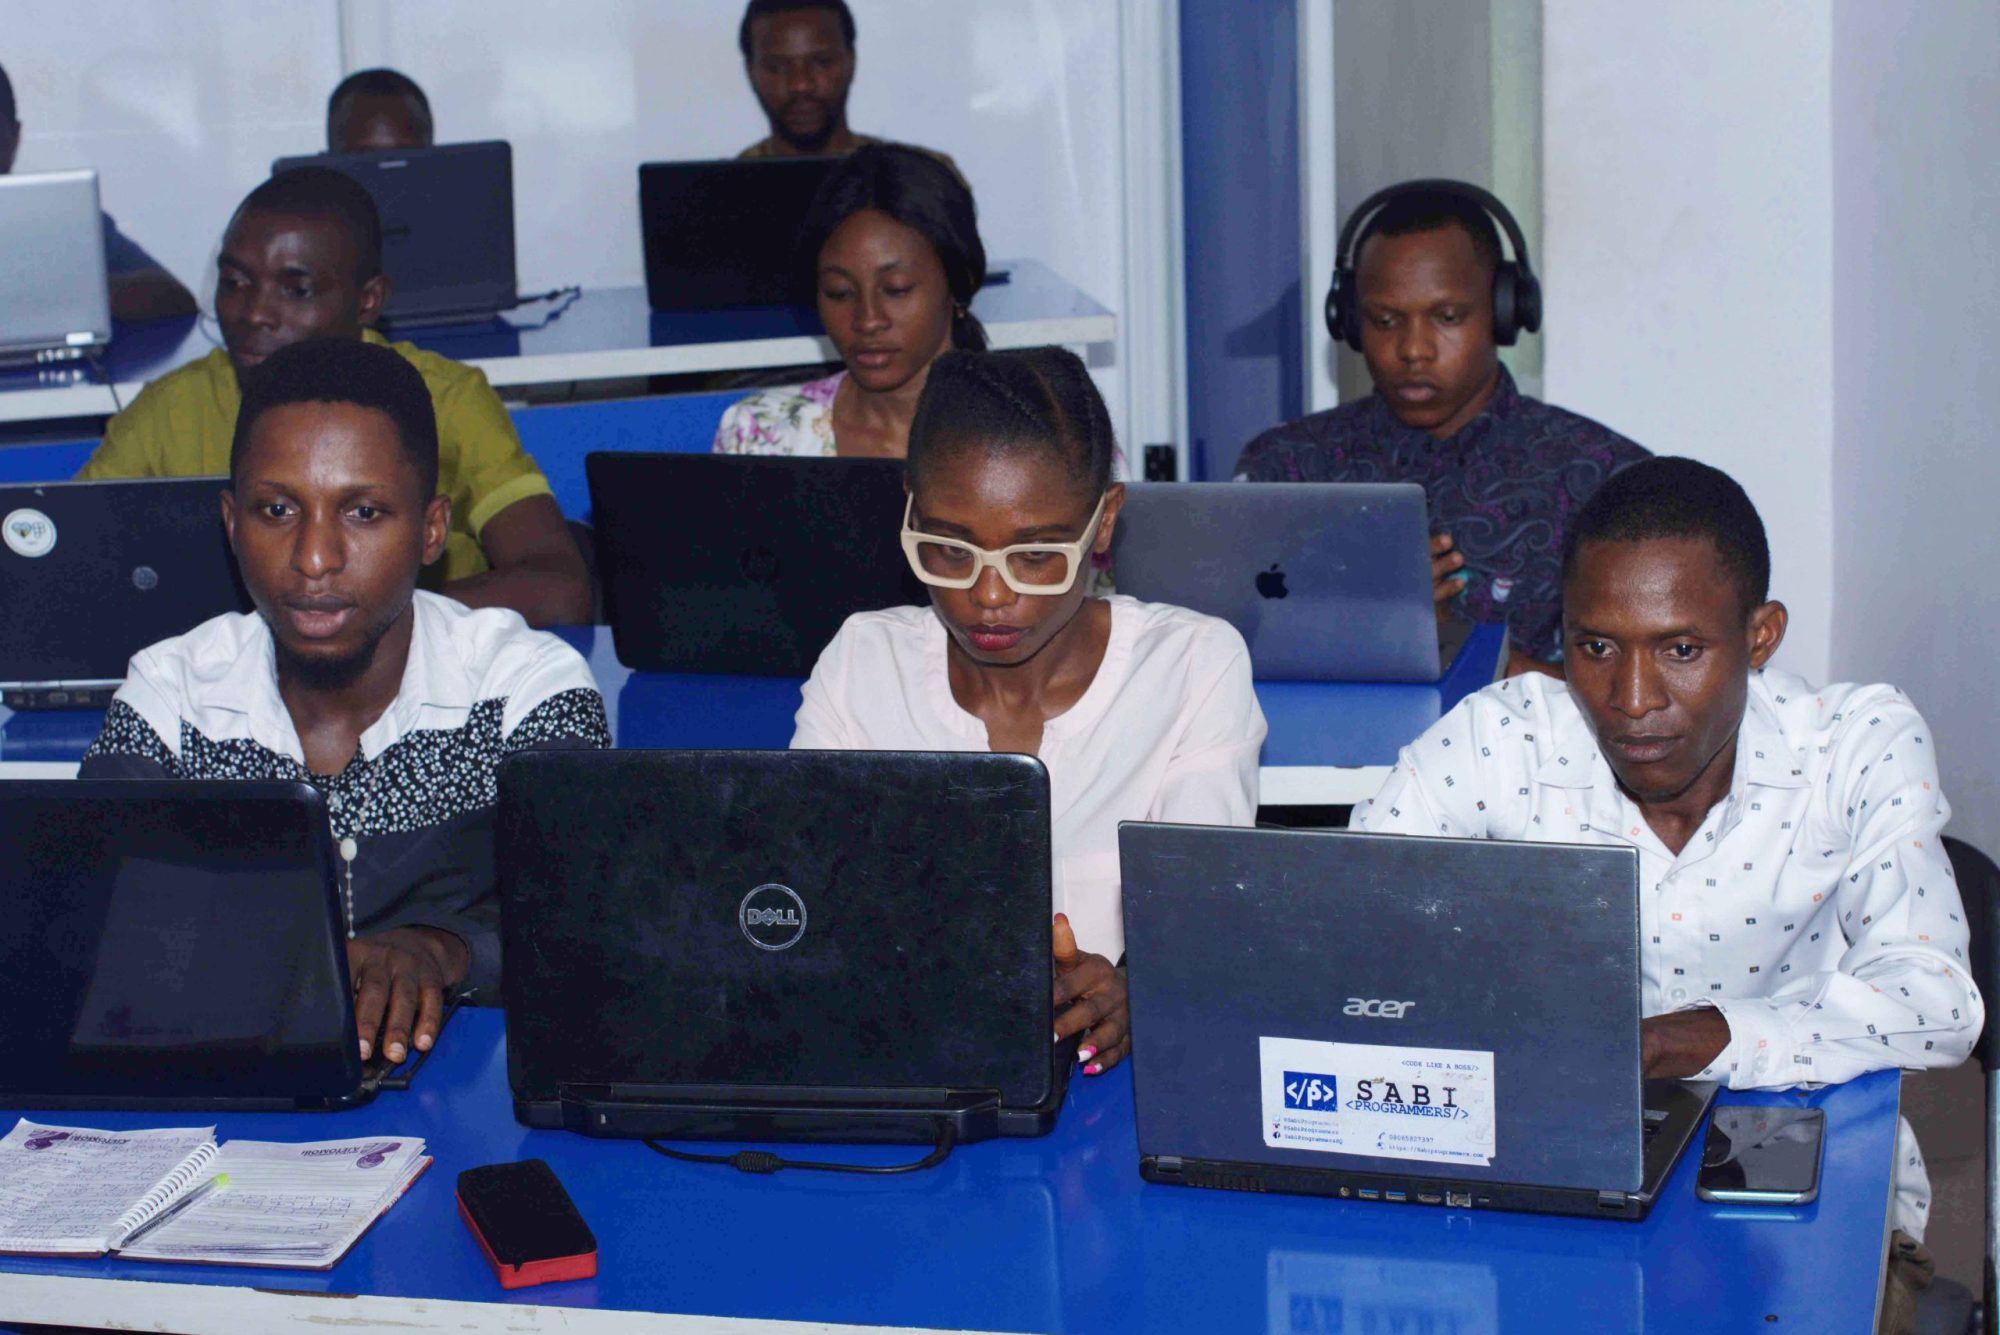 Best place to learn Canva Design in Ondo state, Nigeria, Canva Design Training Centre in Ondo state Nigeria, Can You Master Web Development in 3 Months, Where can I work as a UIUX Design in Nigeria? See the Answer